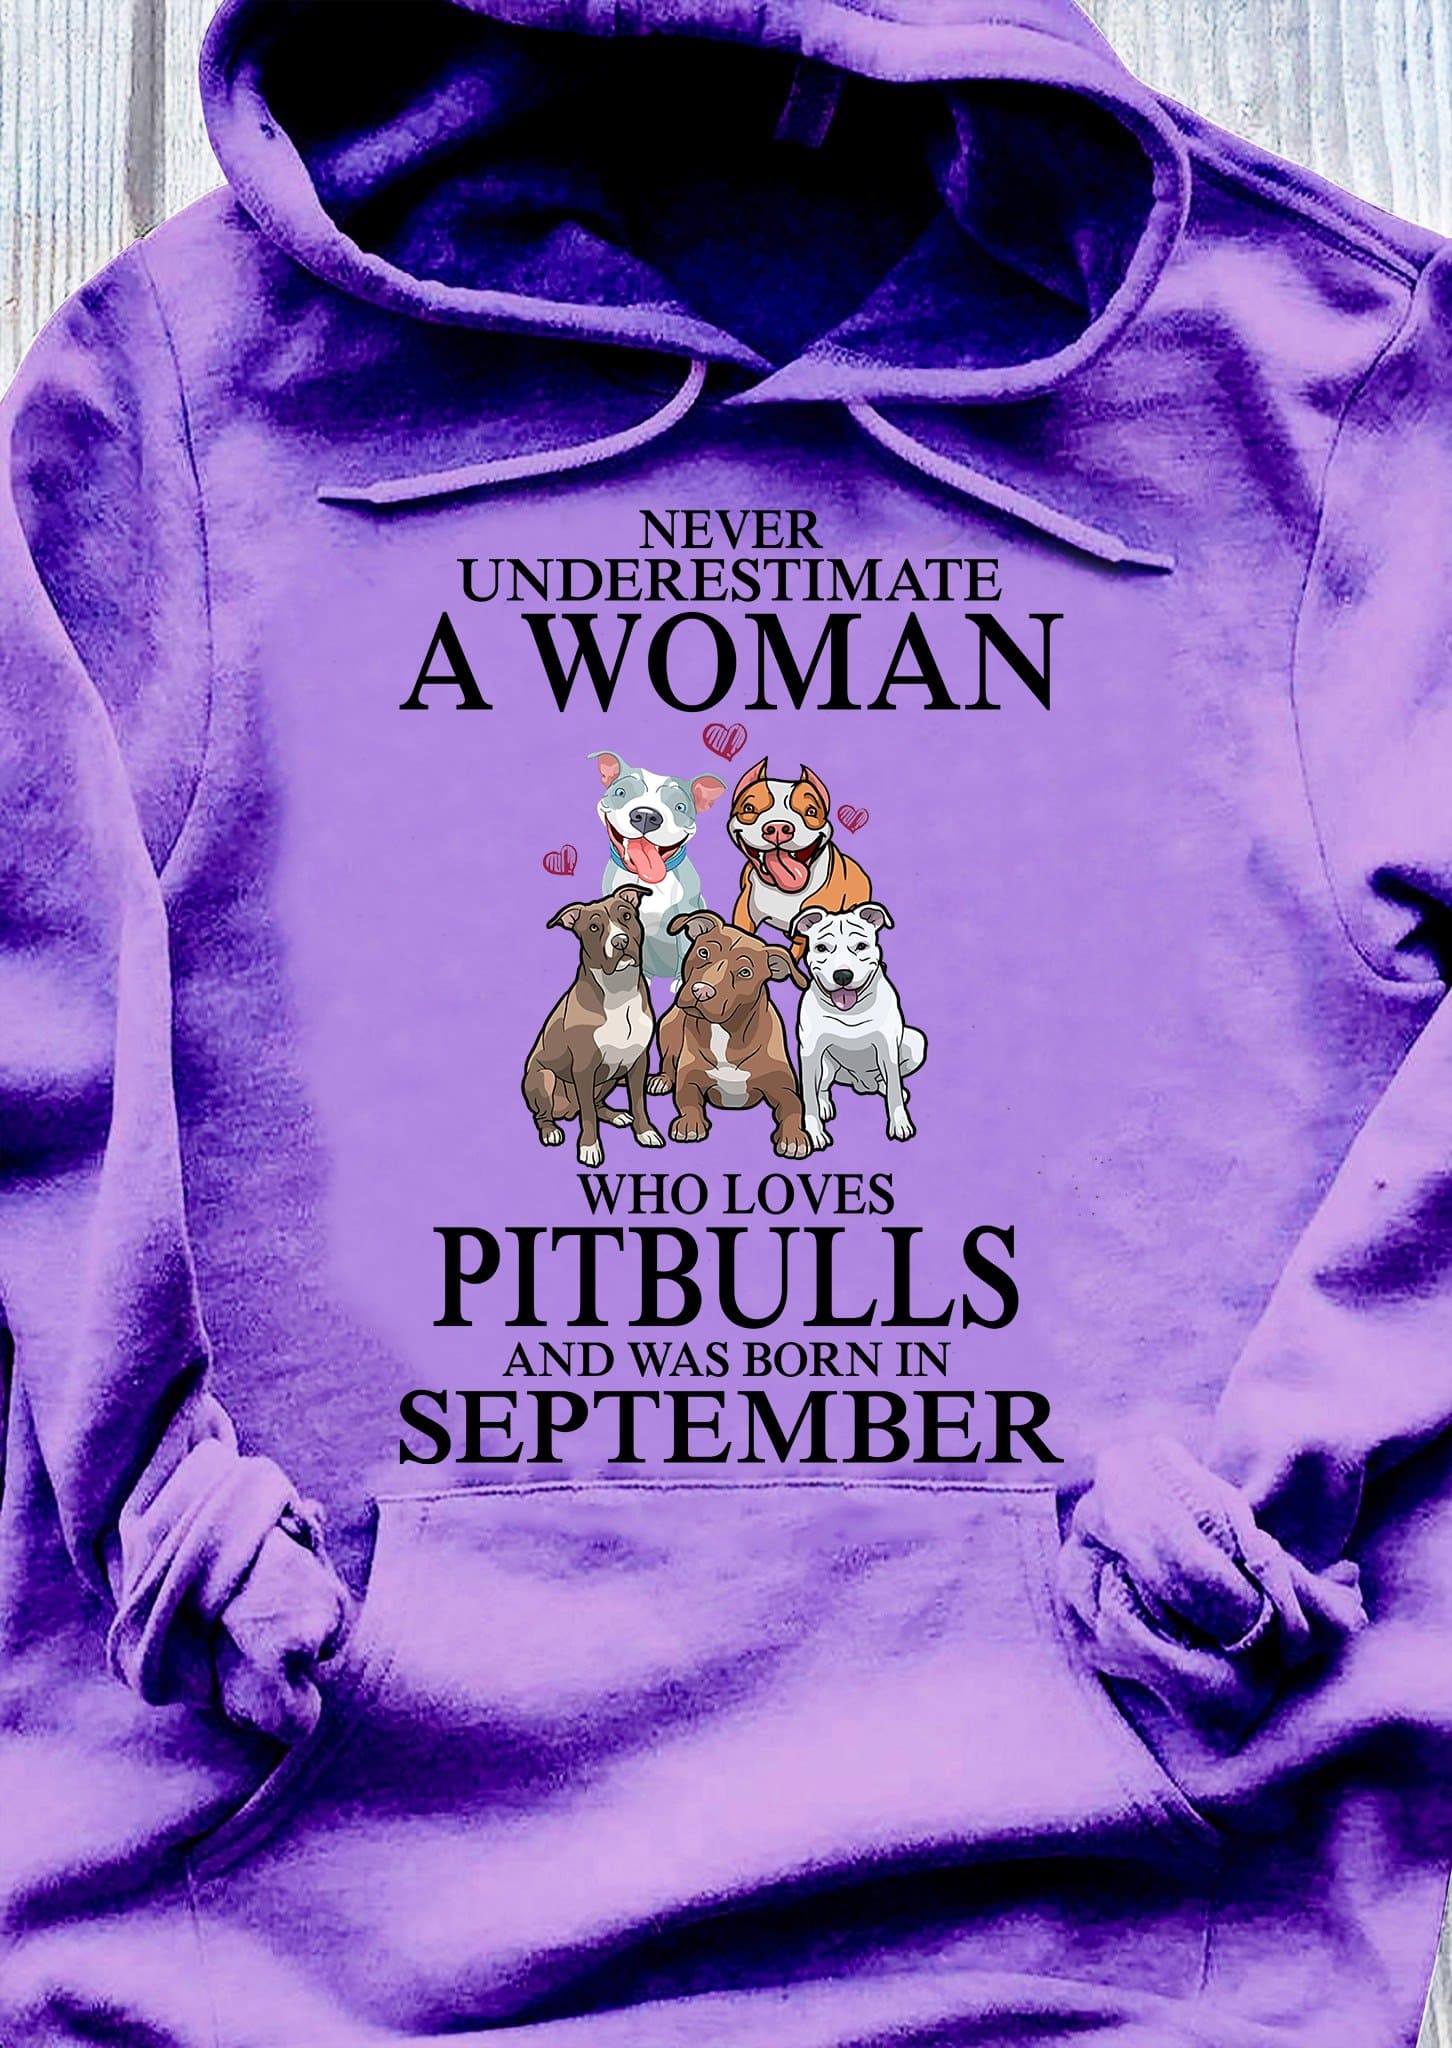 September Birthday Woman Love Pitbull - Never underestimate a woman who loves pitbull and was born in september